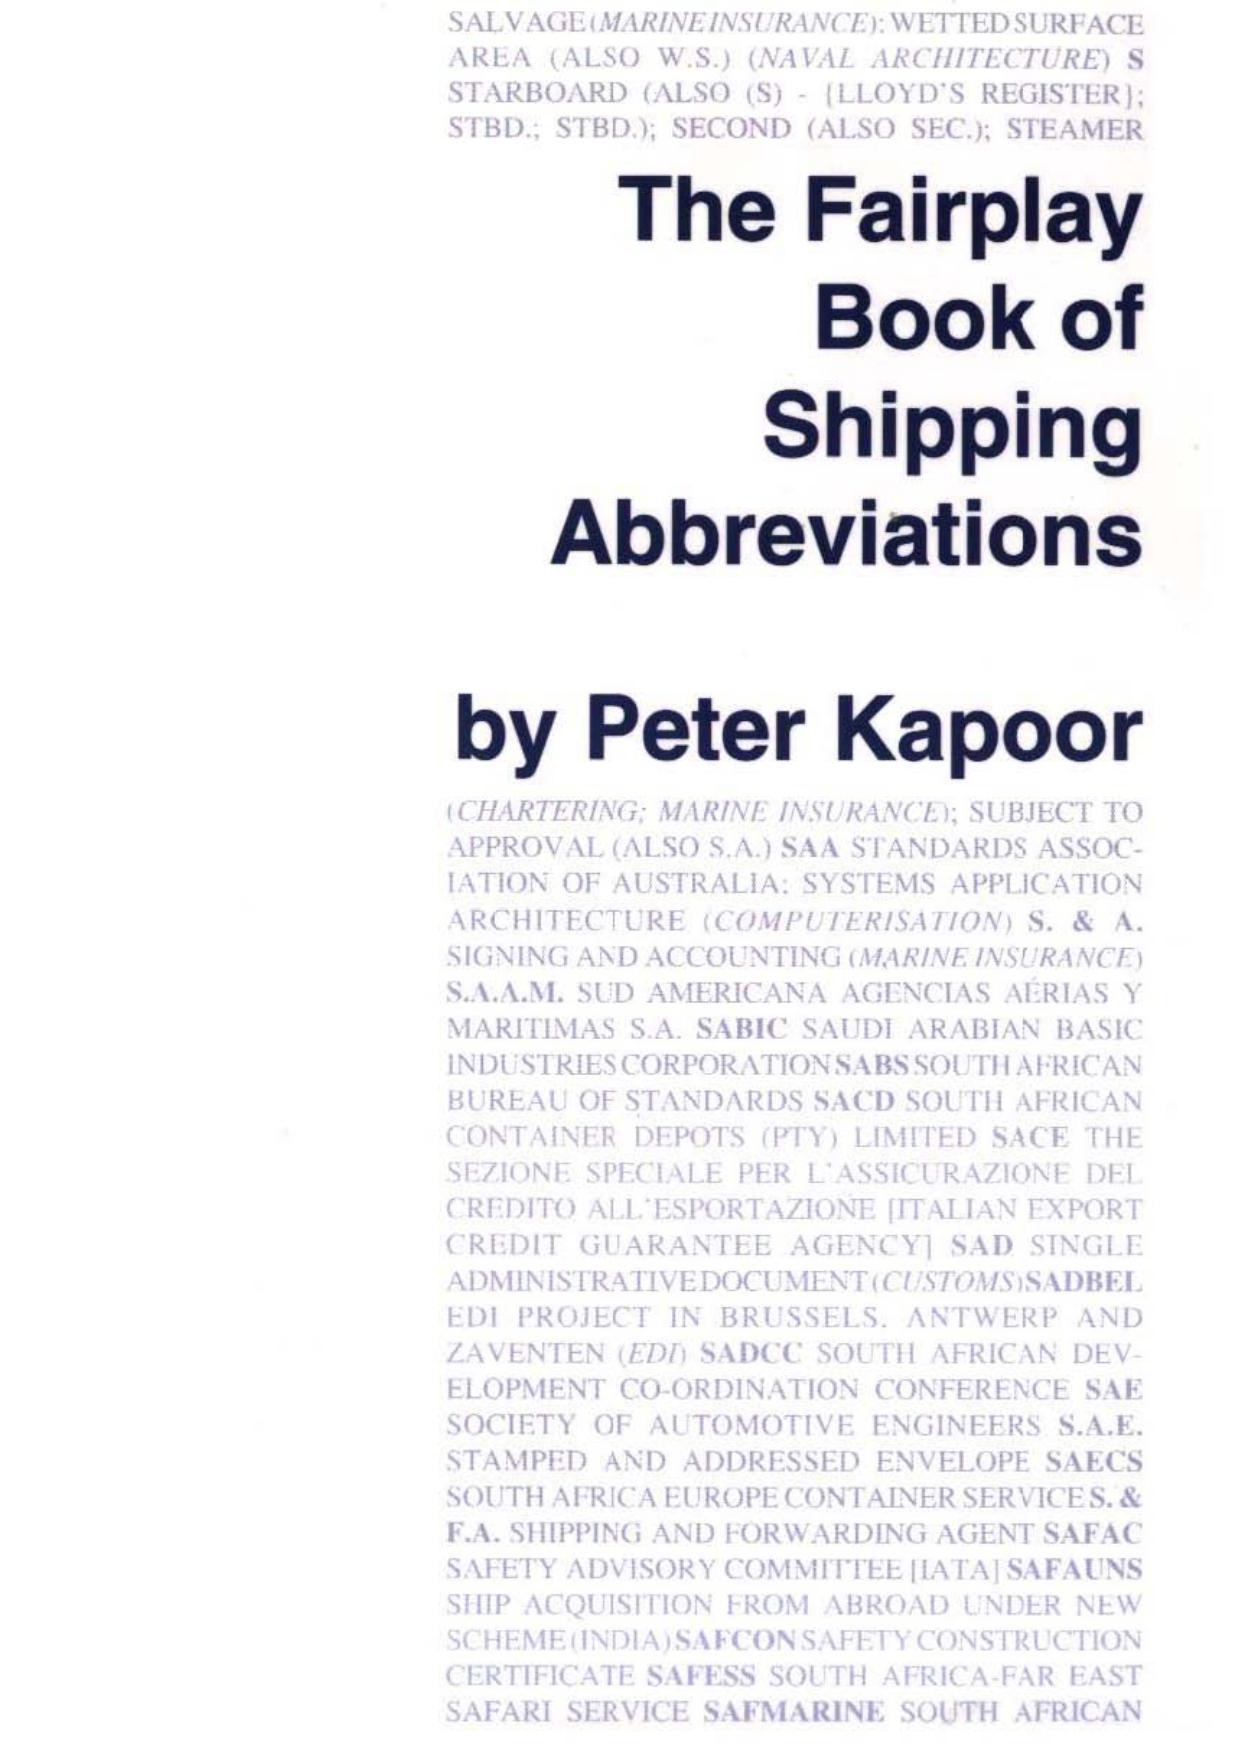 The Fairplay Book of Shipping Abbreviations: Acronyms & Abbreviations Used in Shipping and International Trade